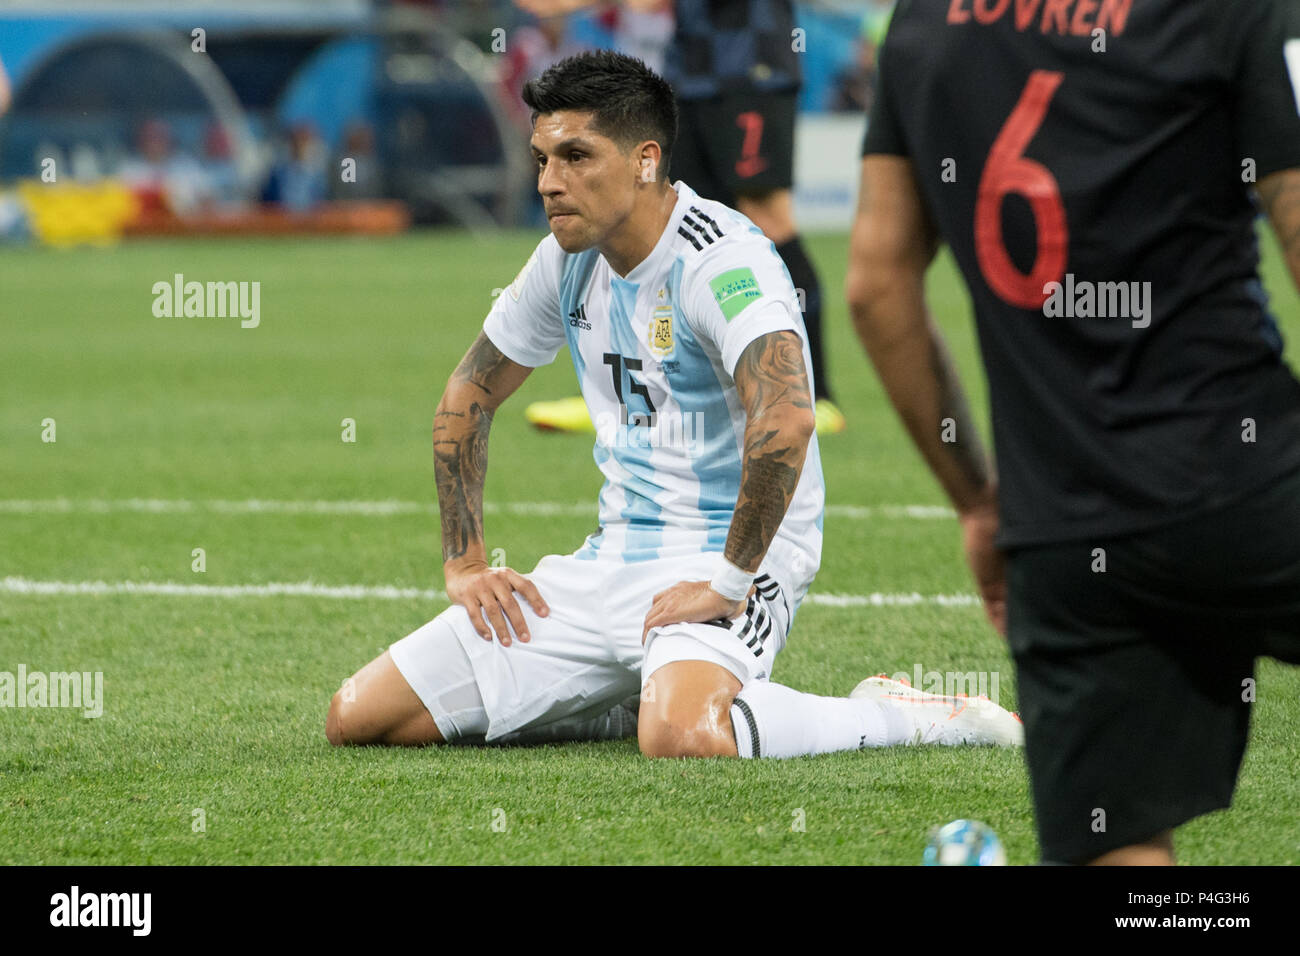 Nizhny Novgorod, Russia. 21 June 2018.  Manuel LANZINI (ARG) kneels on the pitch and gets annoyed at a missed goalchance, frustrated, frustrated, frustrated, disappointed, showered, decapitation, disappointment, sad, whole figure, Argentina (ARG) - Croatia (CRO) 0: 3, preliminary round, Group D, Game 23, on 21.06.2018 in Moscow; Football World Cup 2018 in Russia from 14.06. - 15.07.2018. | usage worldwide Credit: dpa/Alamy Live News Credit: dpa picture alliance/Alamy Live News Stock Photo